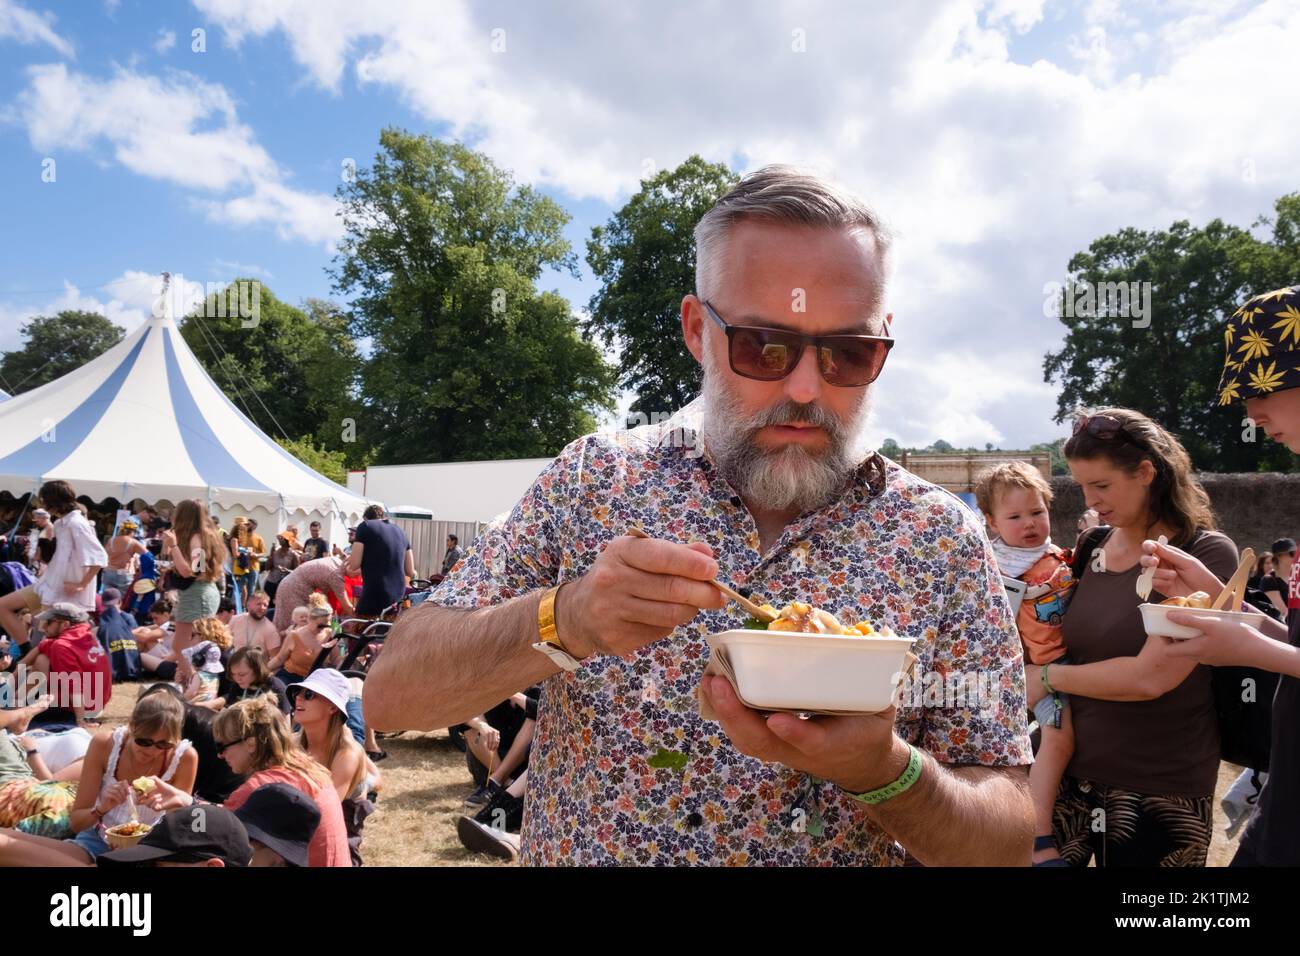 Fast food for the festival crowd at the Green Man 2022 music festival in Wales, UK, August 2022. Photograph: Rob Watkins/Alamy Stock Photo